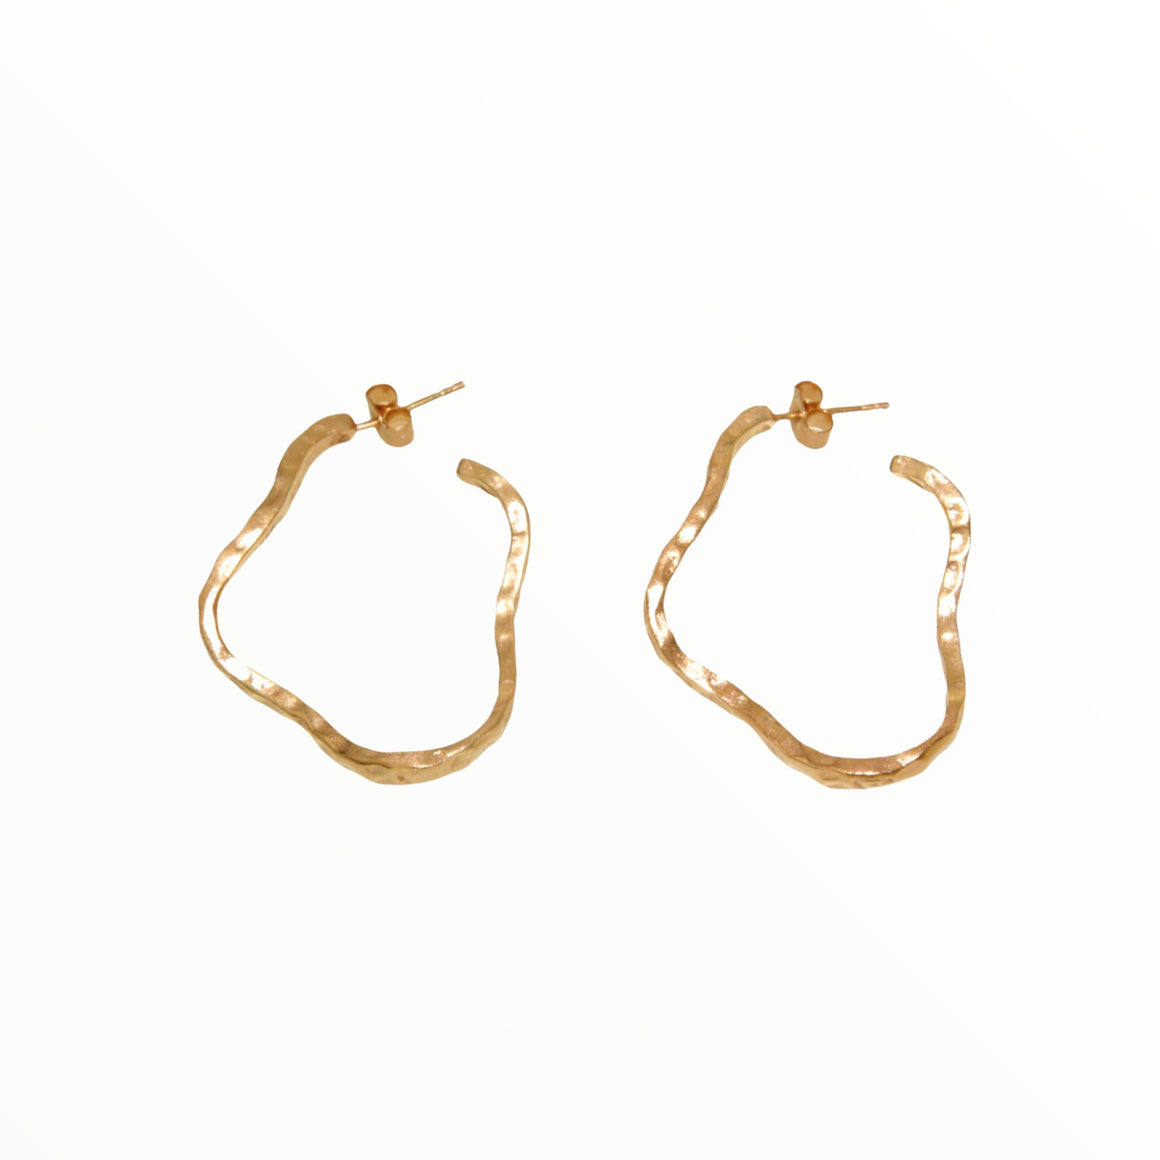 Devi Curly Hoops in hammered Gold